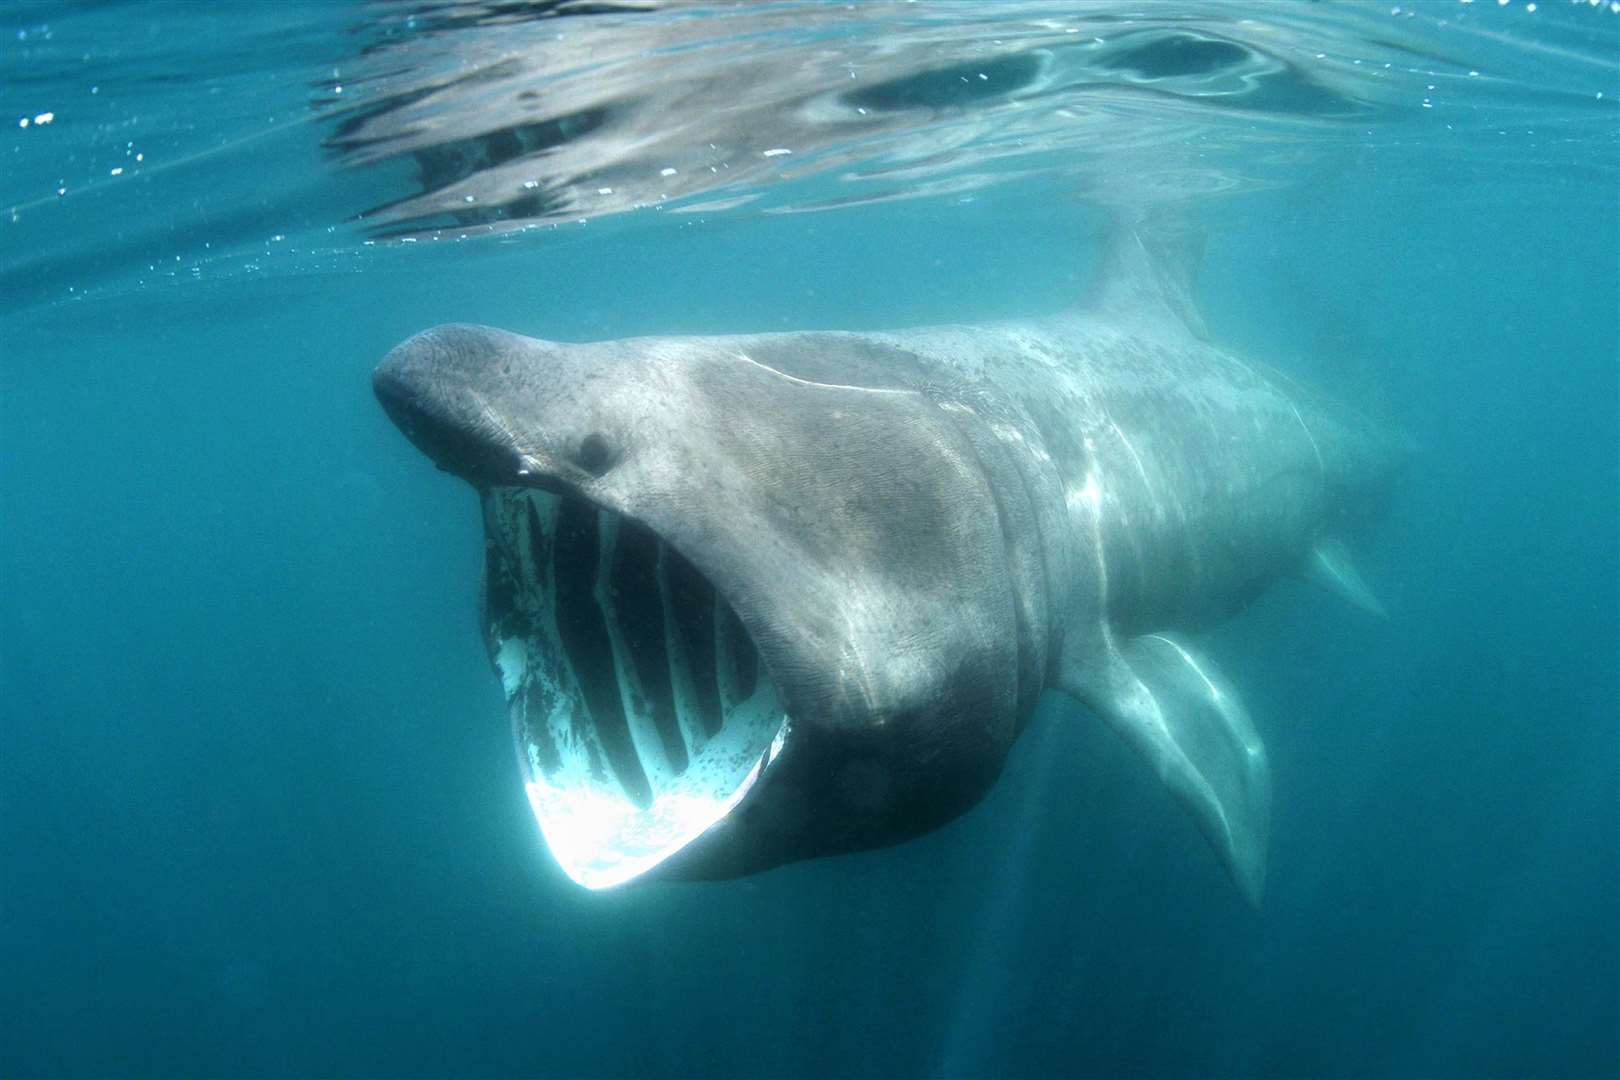 Basking sharks have been spotted in the Moray Firth. Picture: Simon Burt/westcountryphotographers.com/Adobe Stock